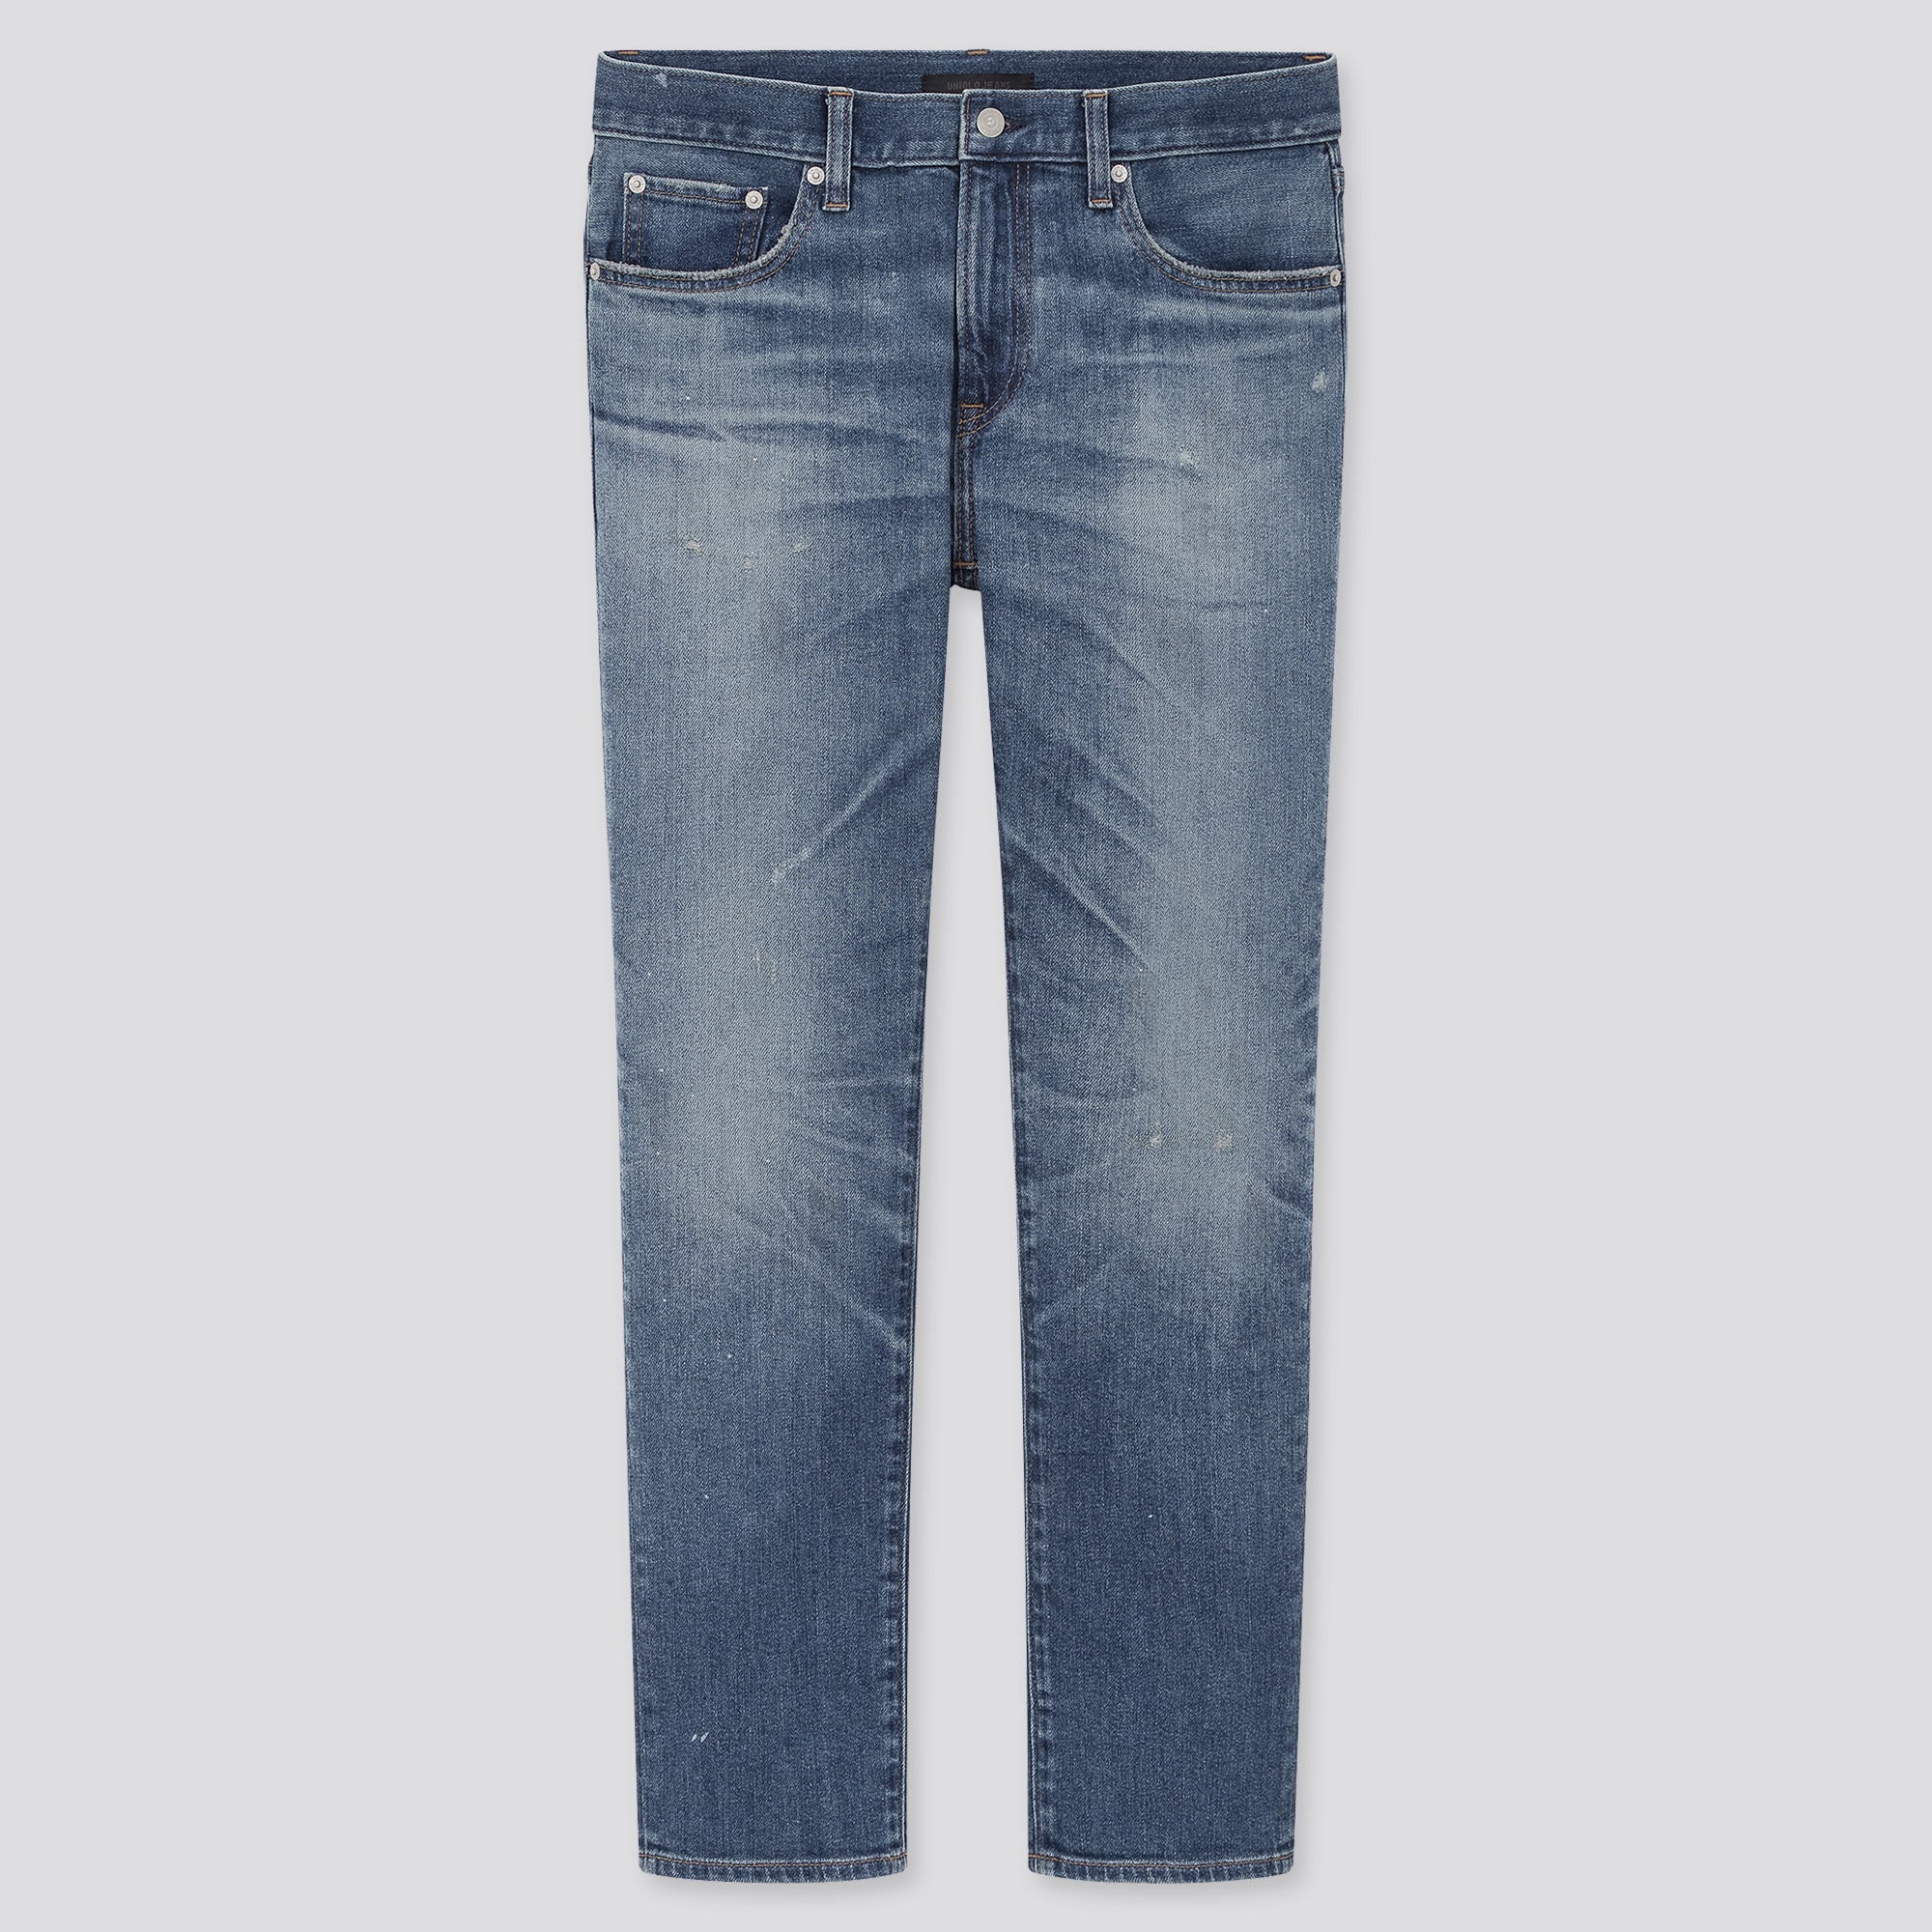 Buy > mid rise jeans mens > in stock